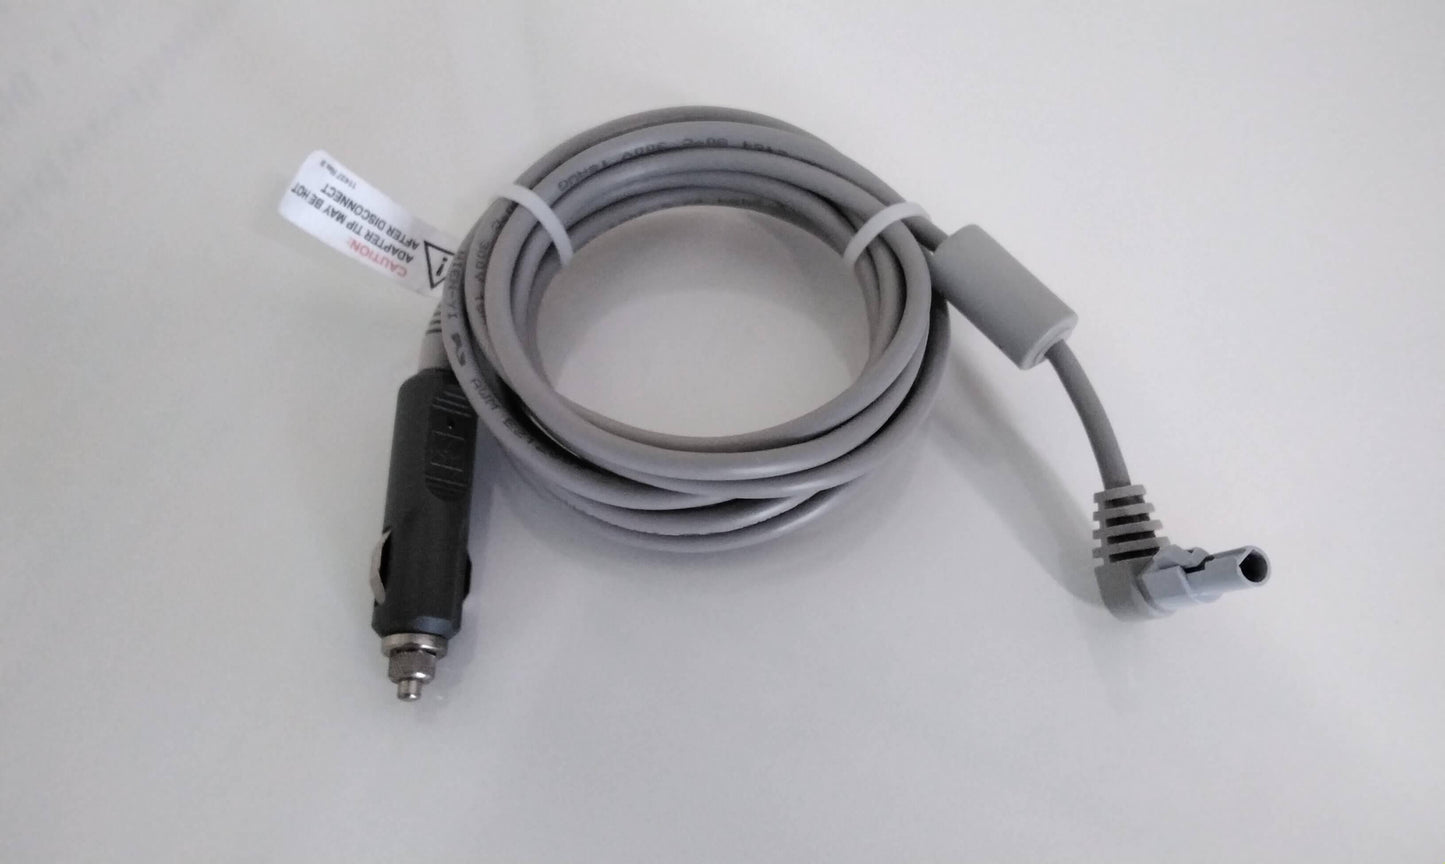 USED CareFusion Vyaire Automotive LTV Charger Power Cord 11544 with Free Shipping and Warranty - MBR Medicals